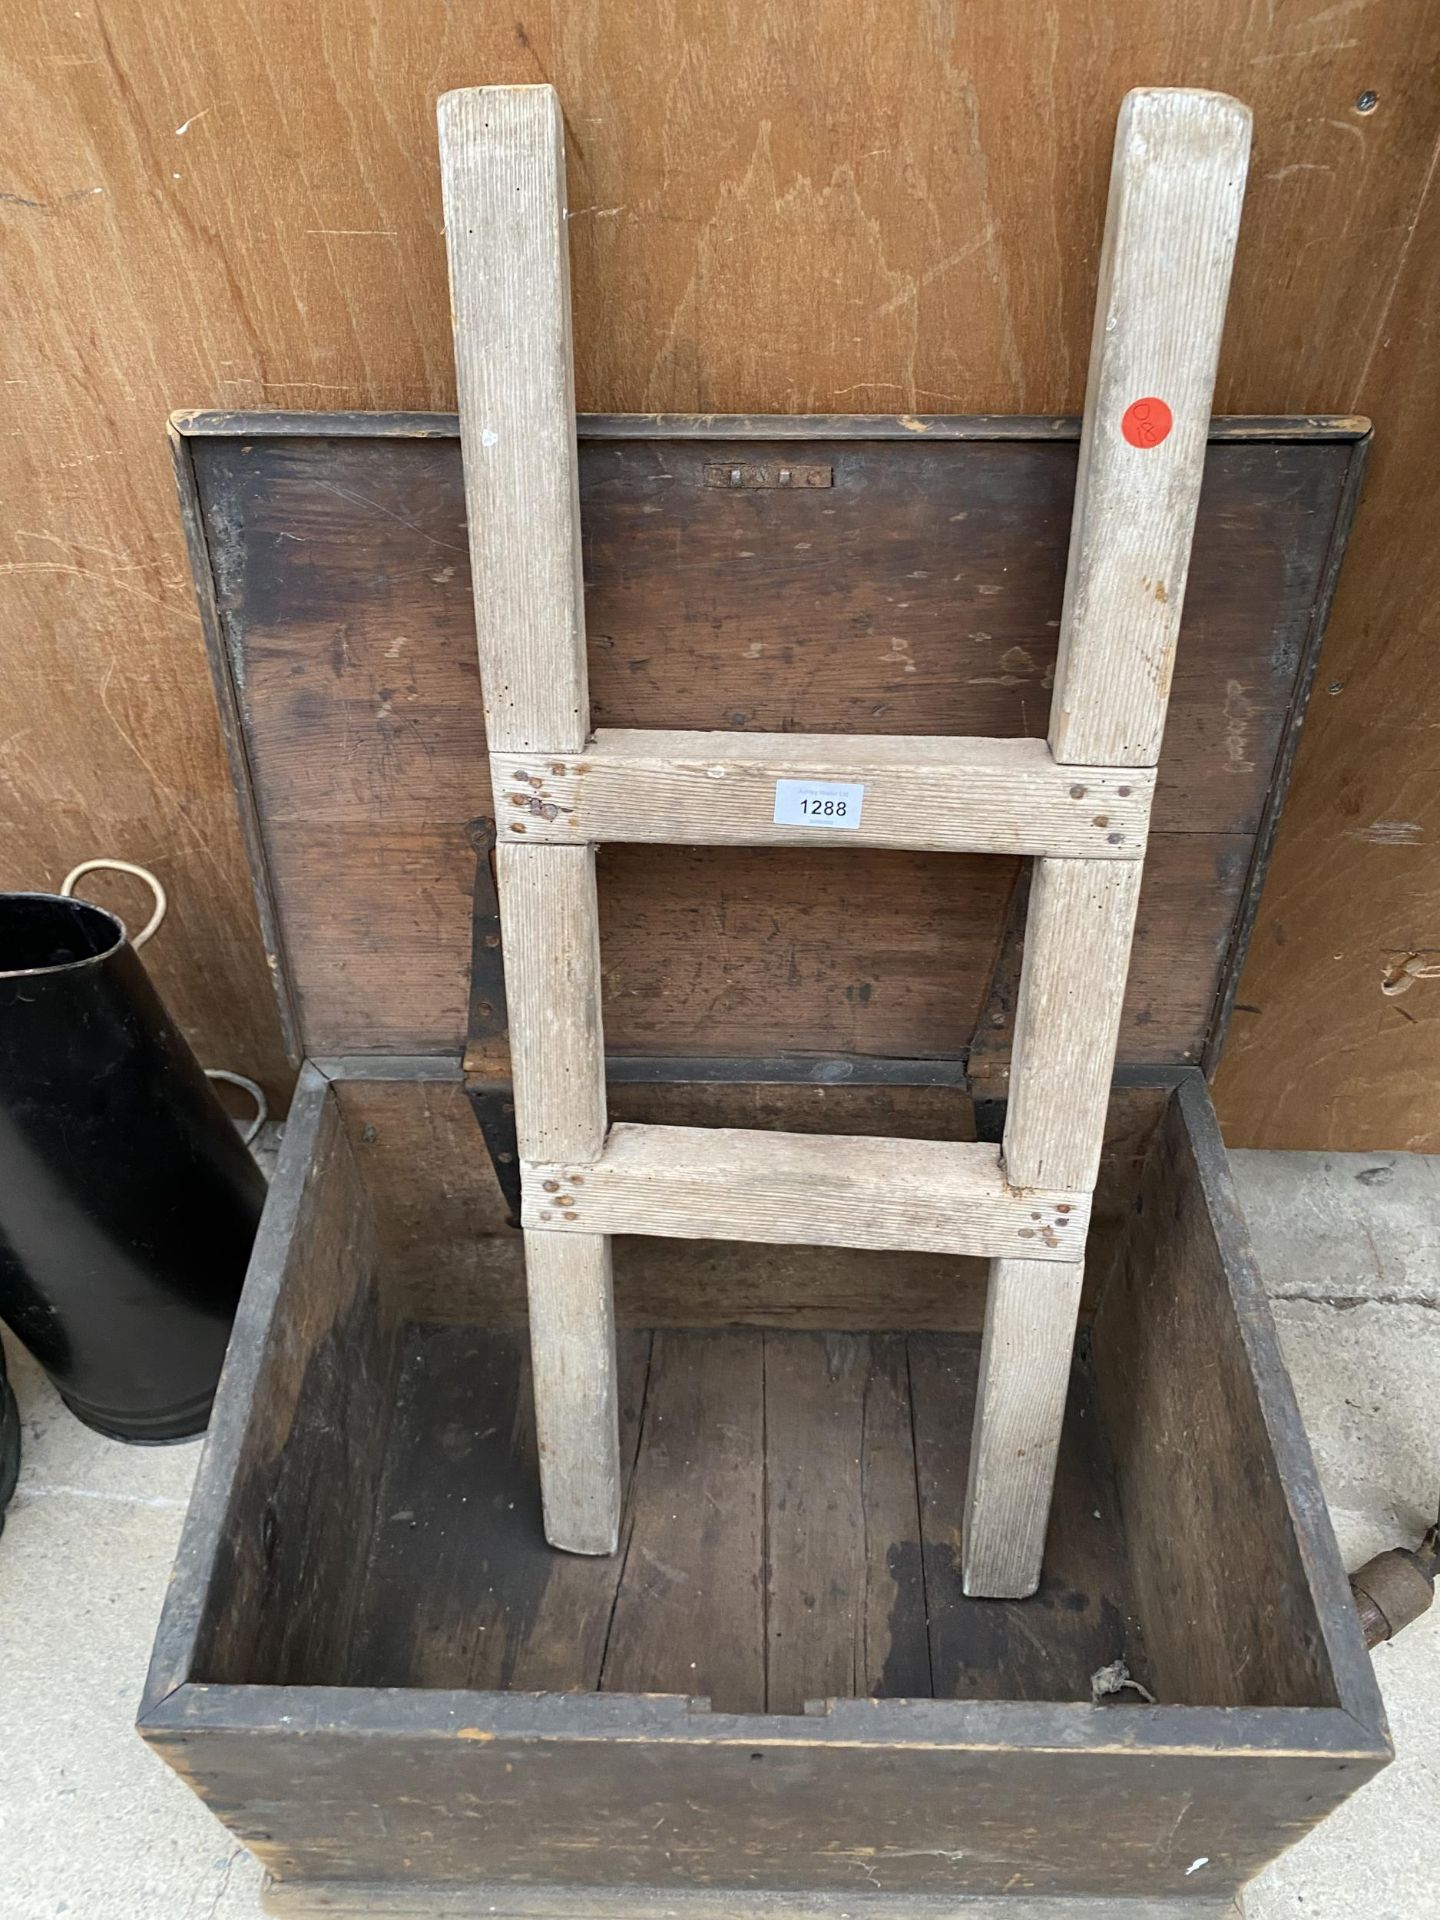 A VINTAGE WOODEN JOINERS CHEST AND A TWO RUNG WOODEN LADDER